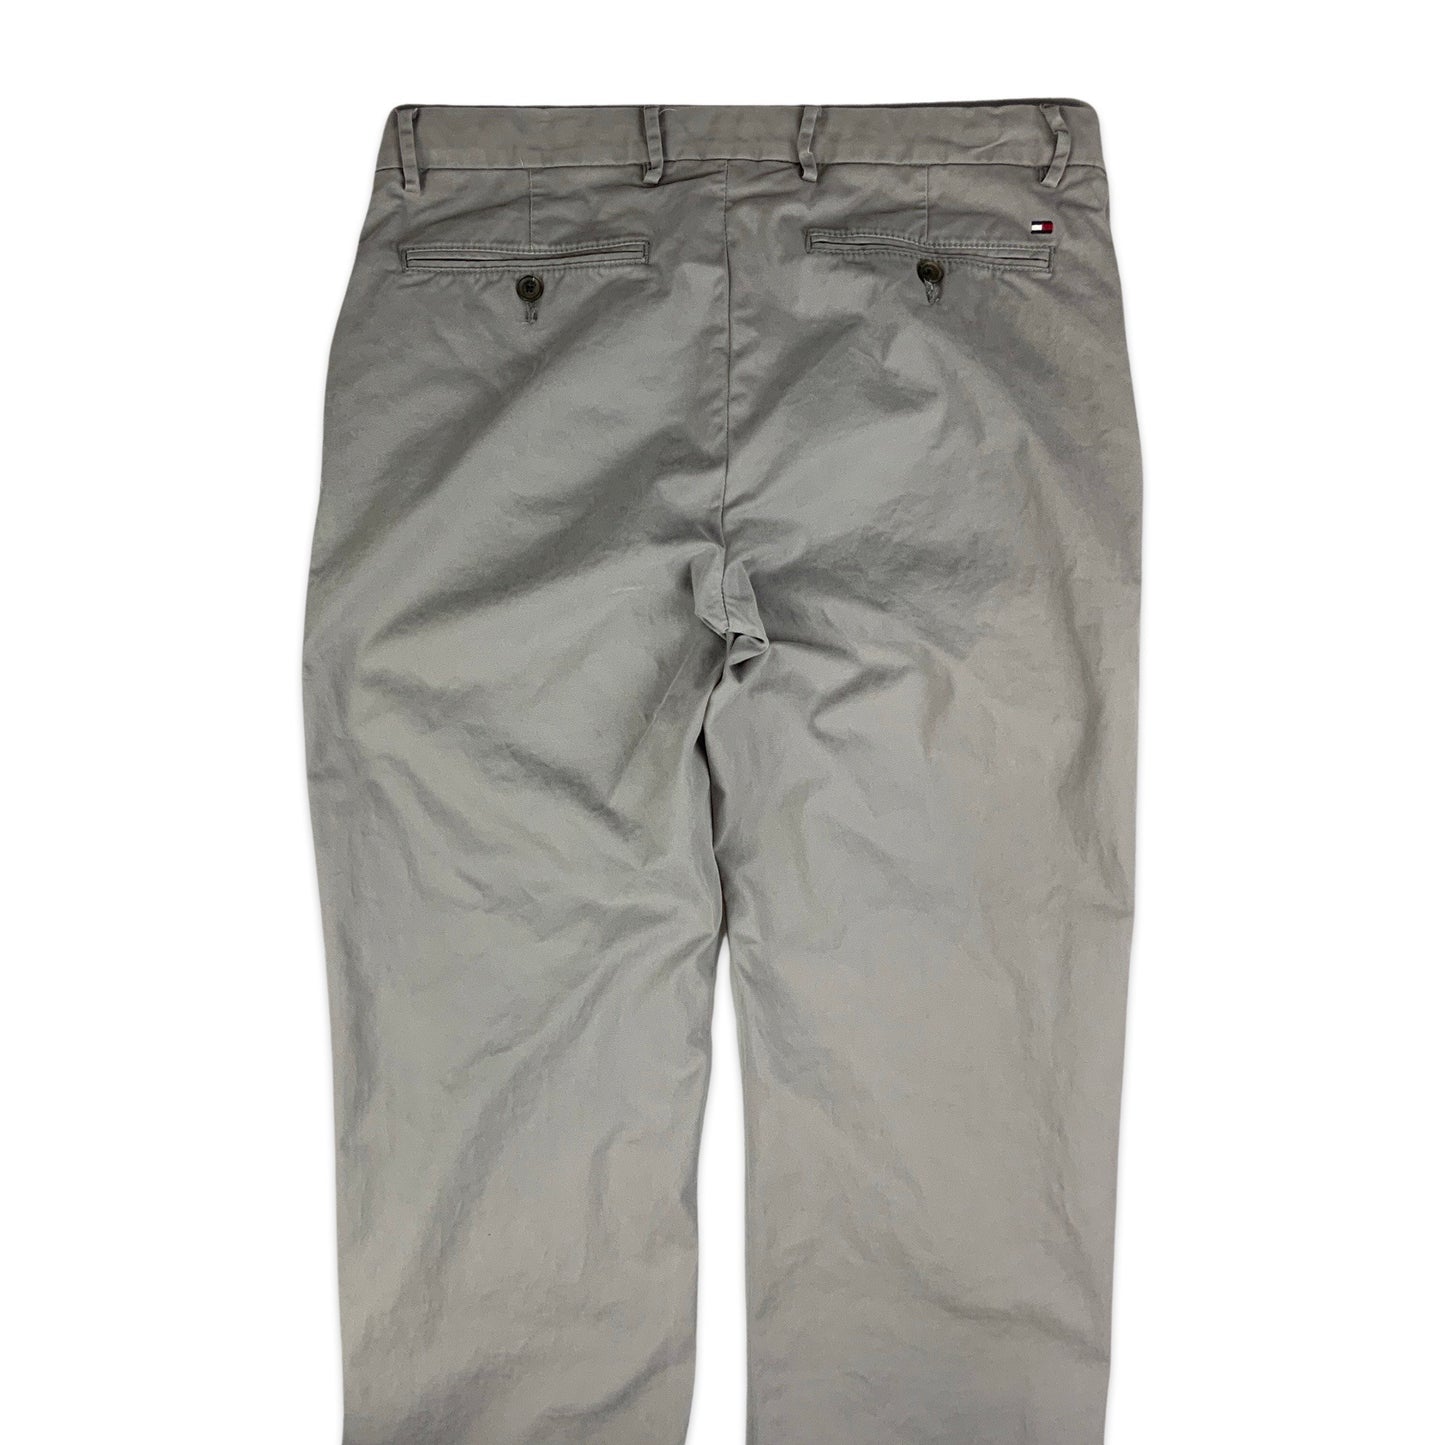 Tommy Hilfiger Grey Chino Trousers 36W 32L